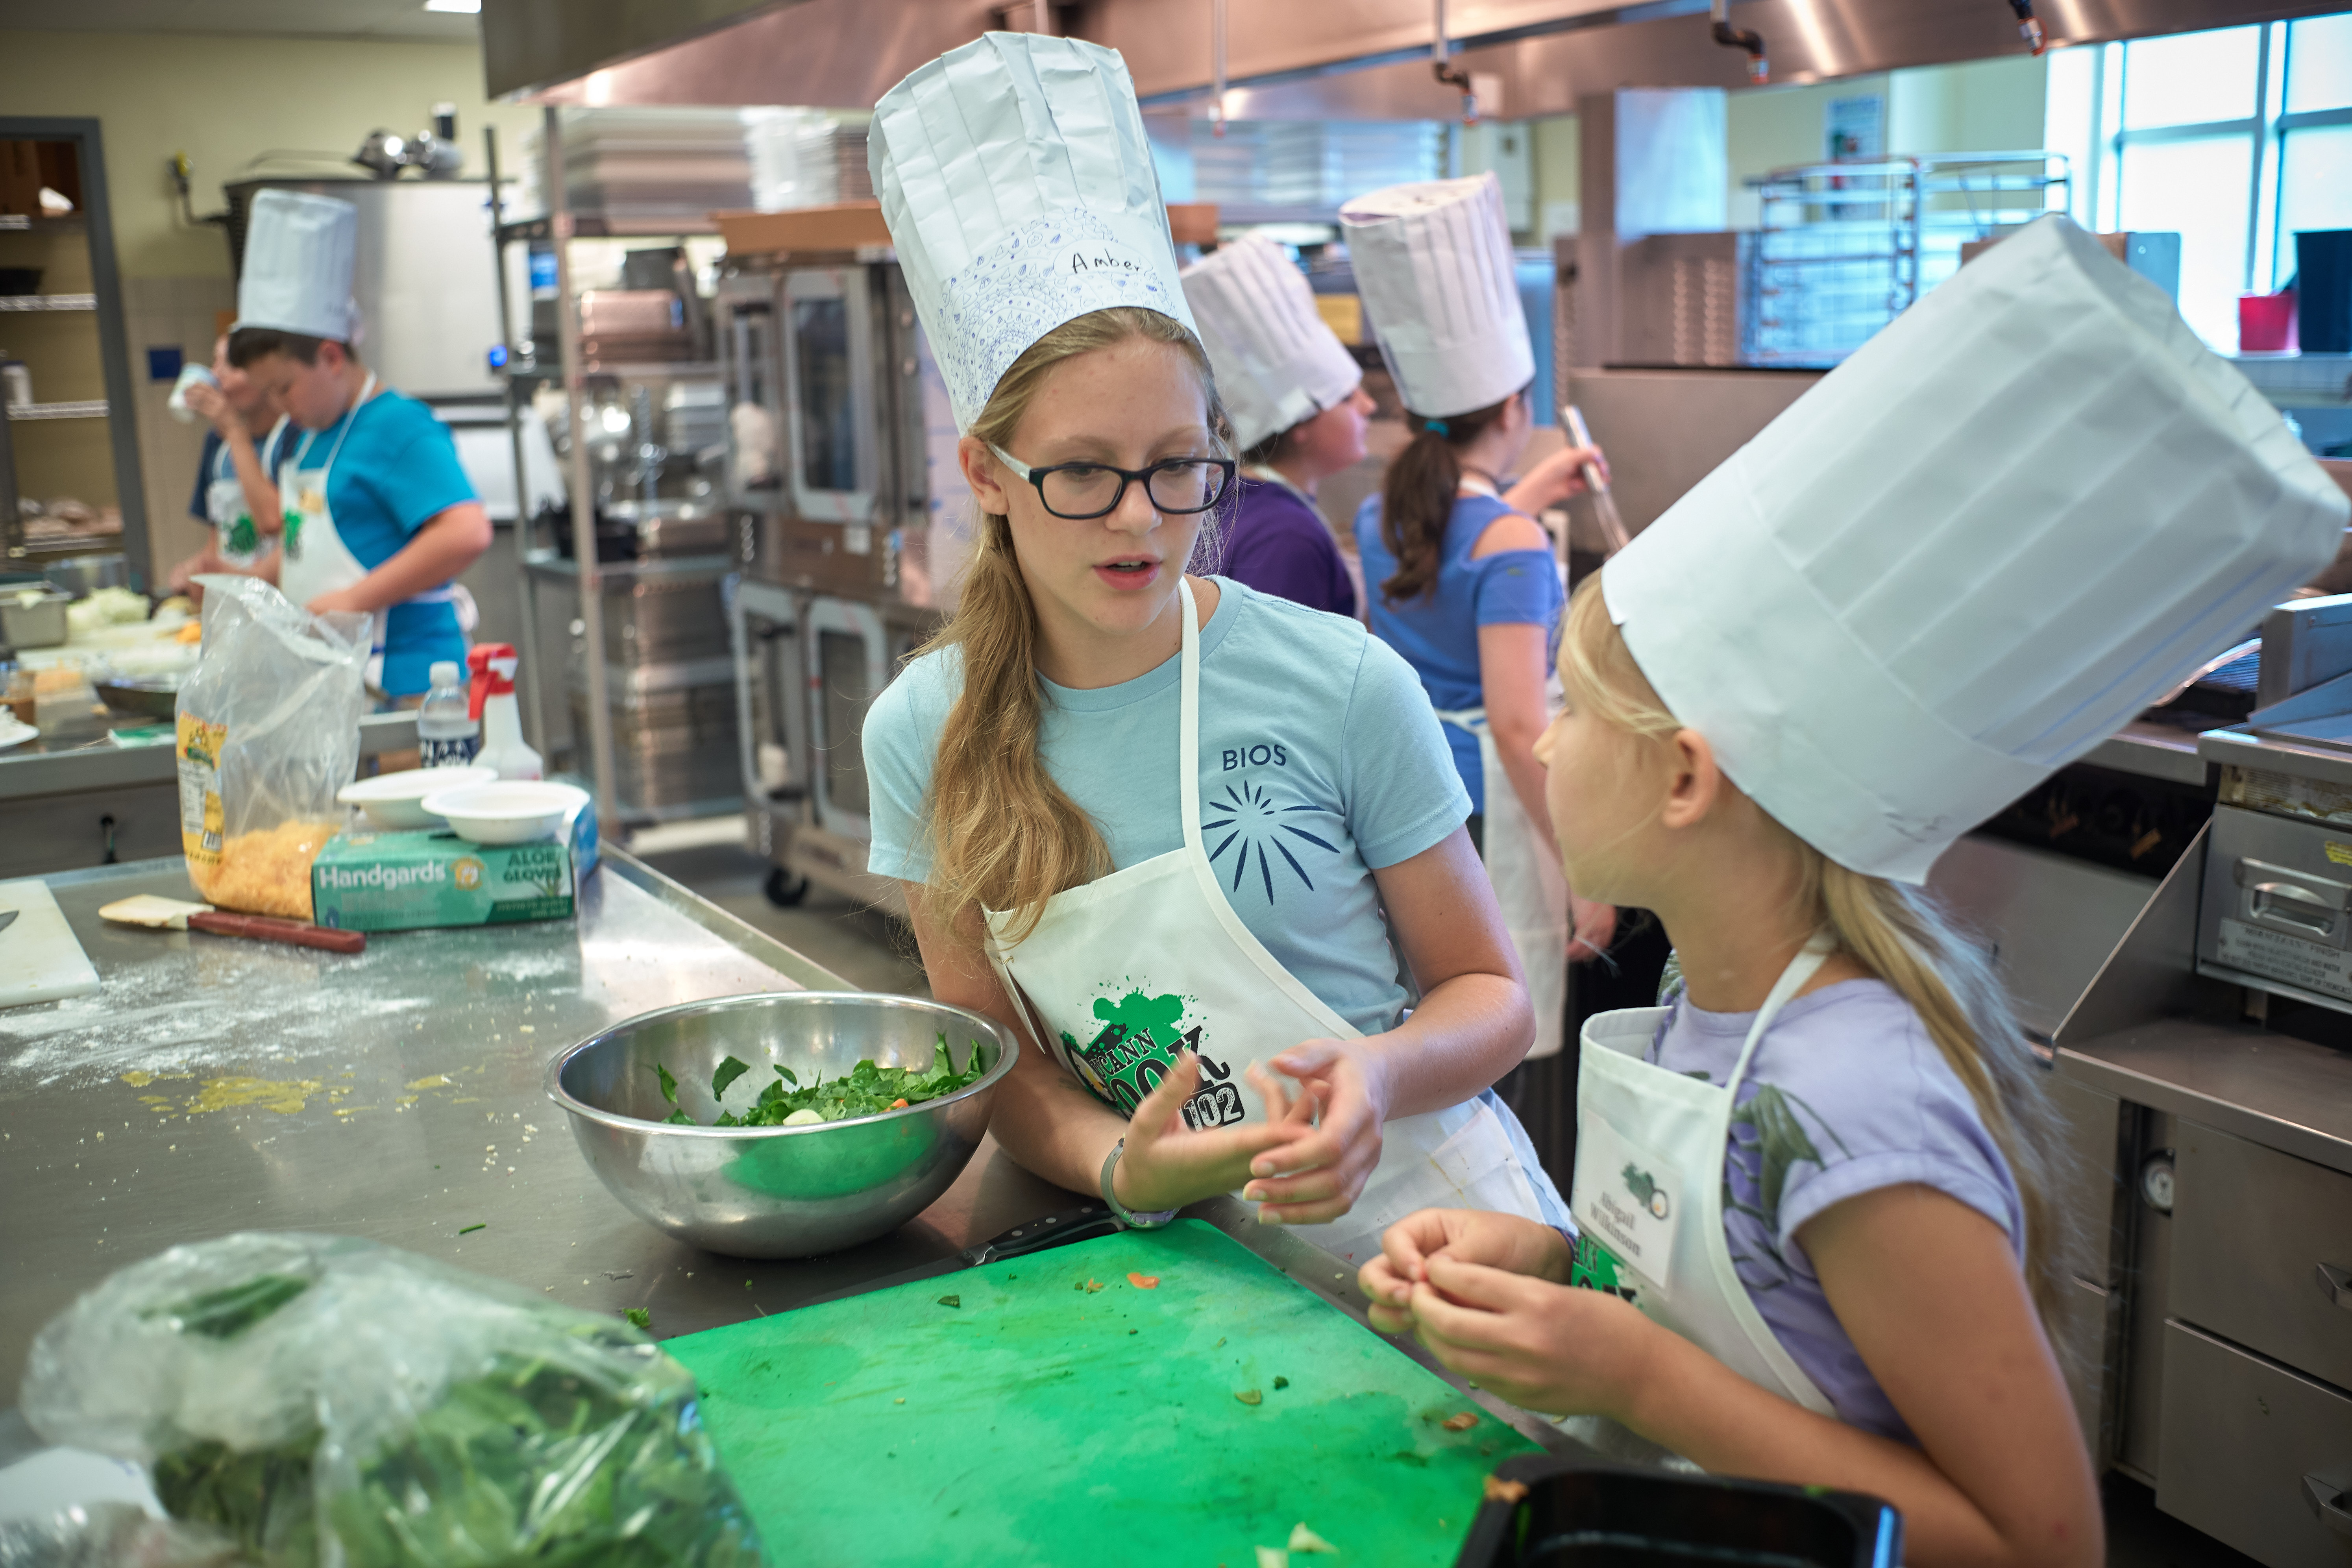 Amber Recchia, 13, of Ashford, center, and Abigail Wilkinson, 9, of Norwich, discuss ingredients to use for a salad dressing during a cooking competition held at the UCann Cook Camp at Gelfenbien Commons on July 18, 2019. (Peter Morenus/UConn Photo)